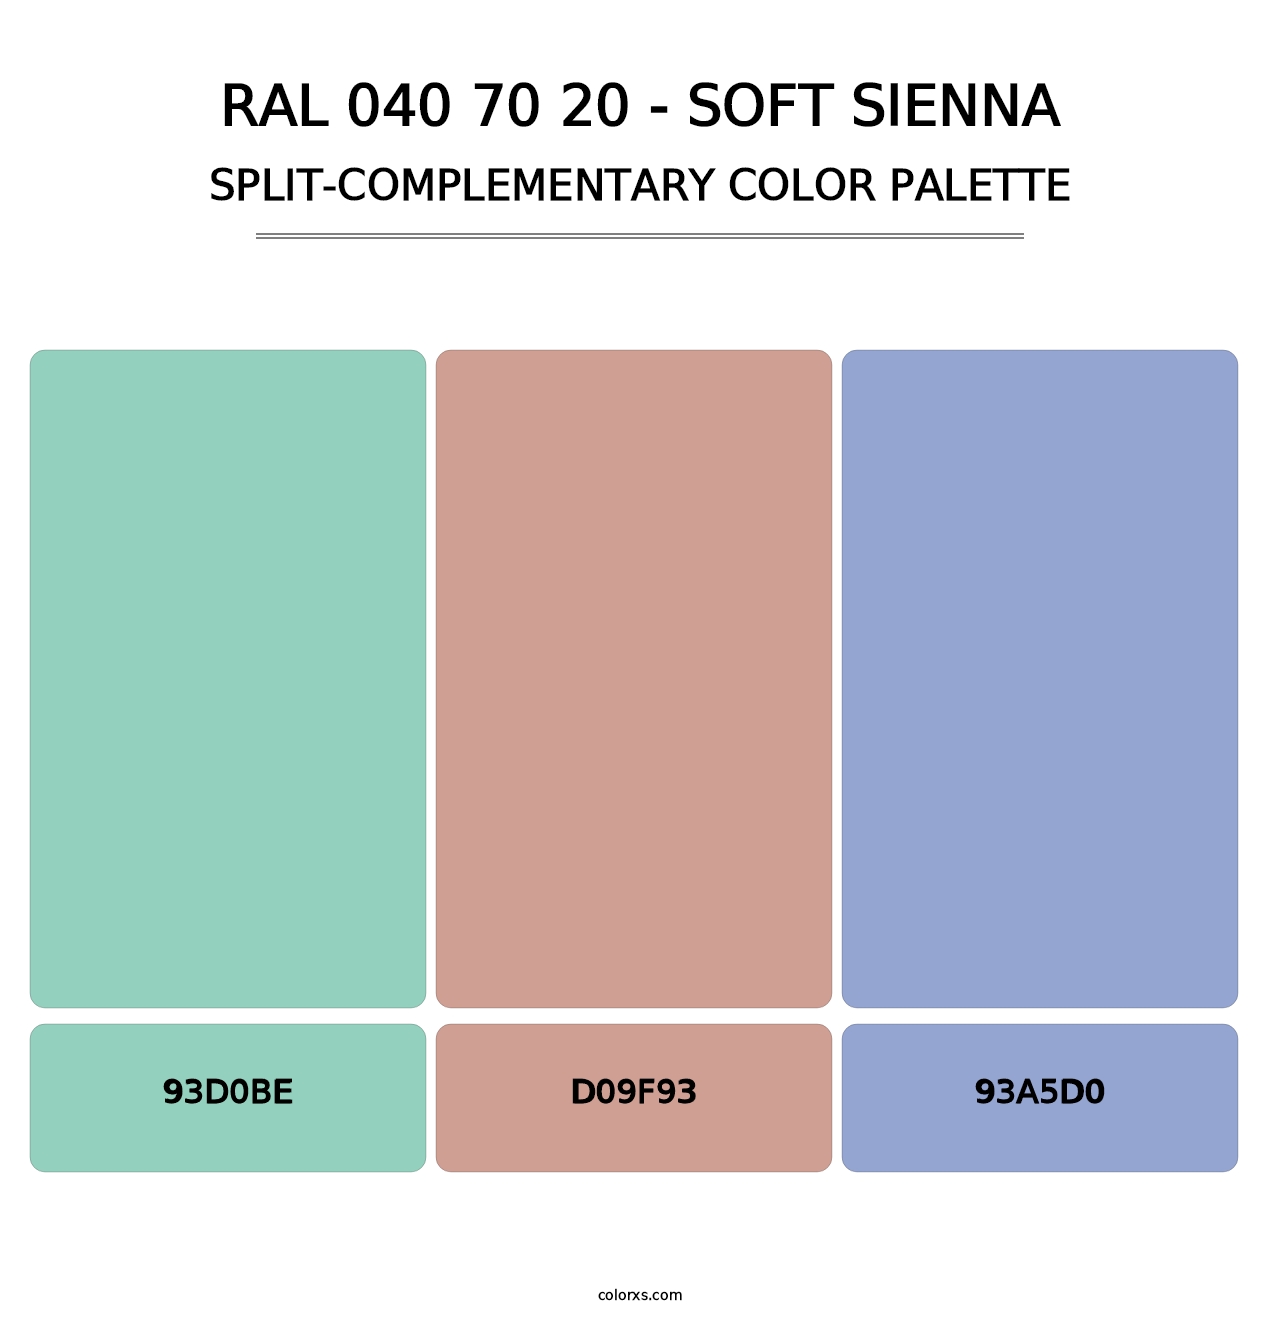 RAL 040 70 20 - Soft Sienna - Split-Complementary Color Palette